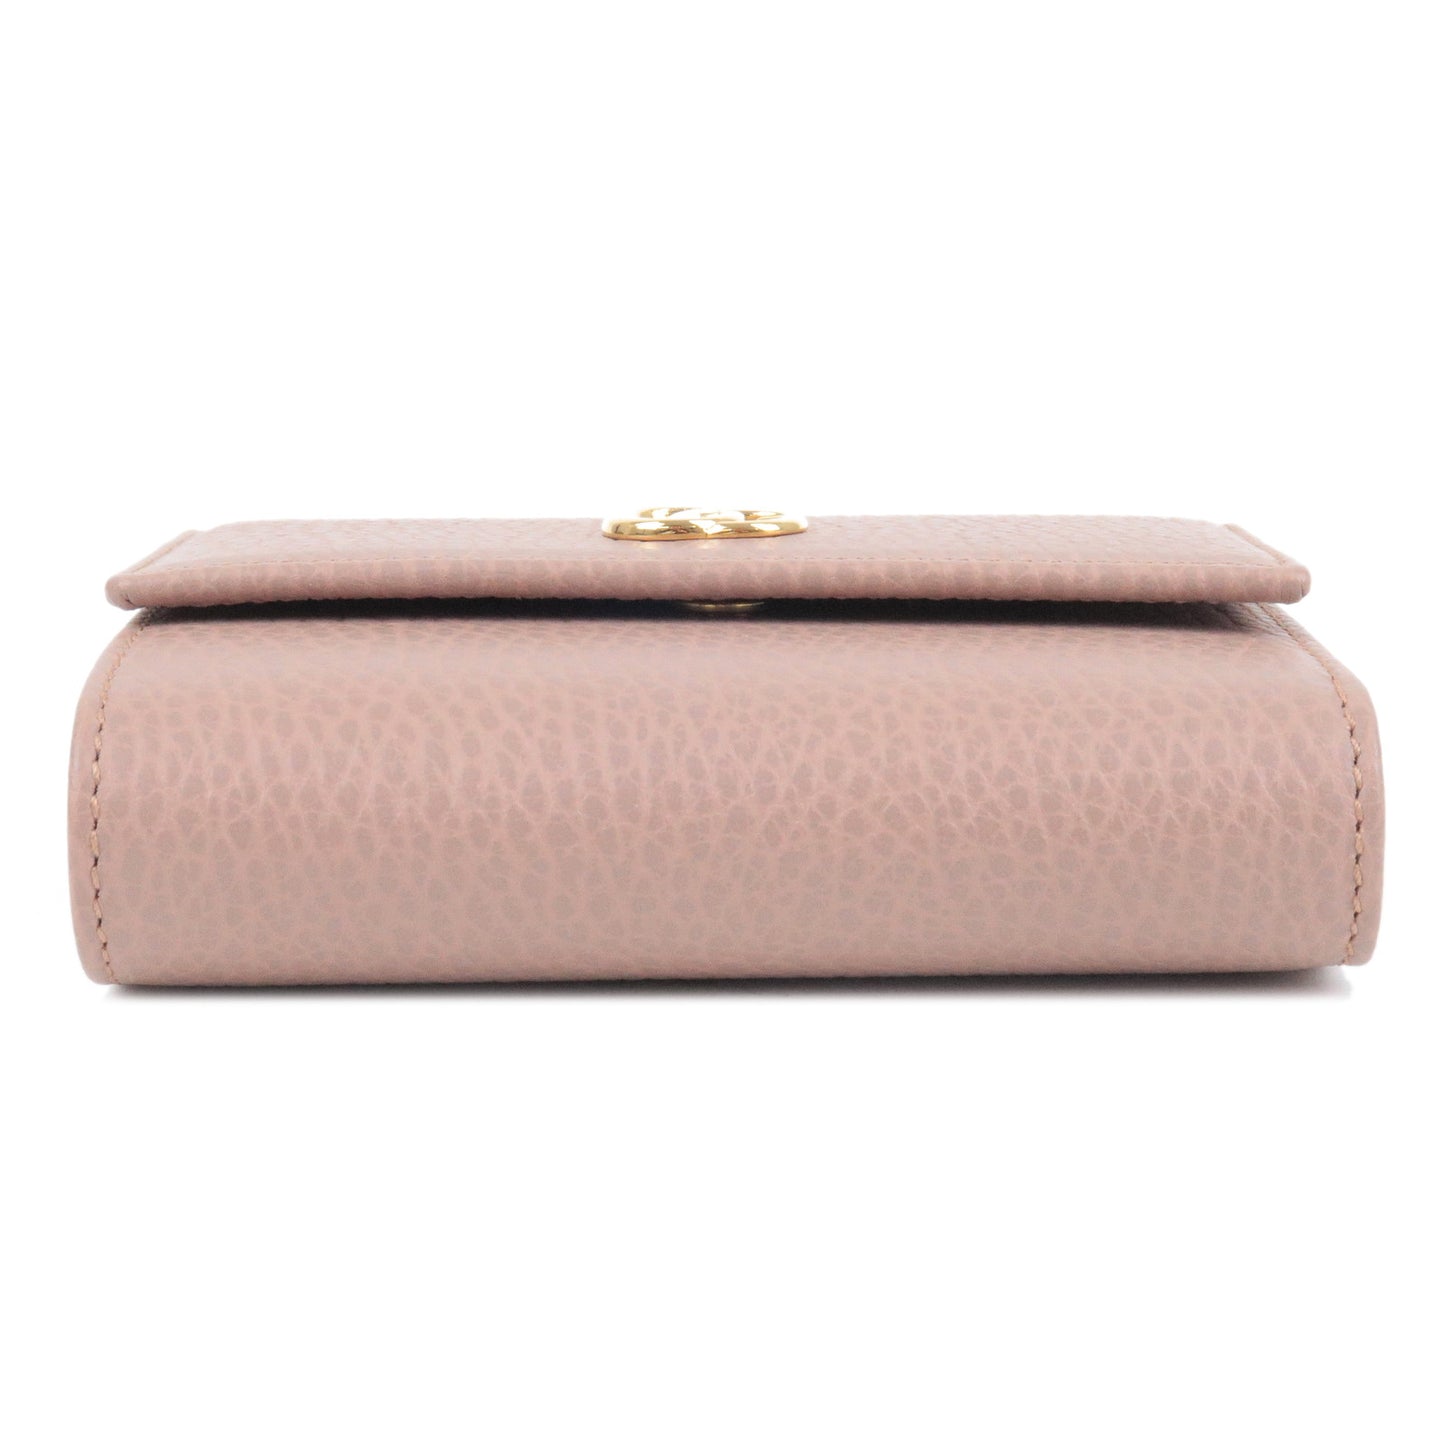 GUCCI GG Marmont Leather Trifold Wallet Pink Beige 546584